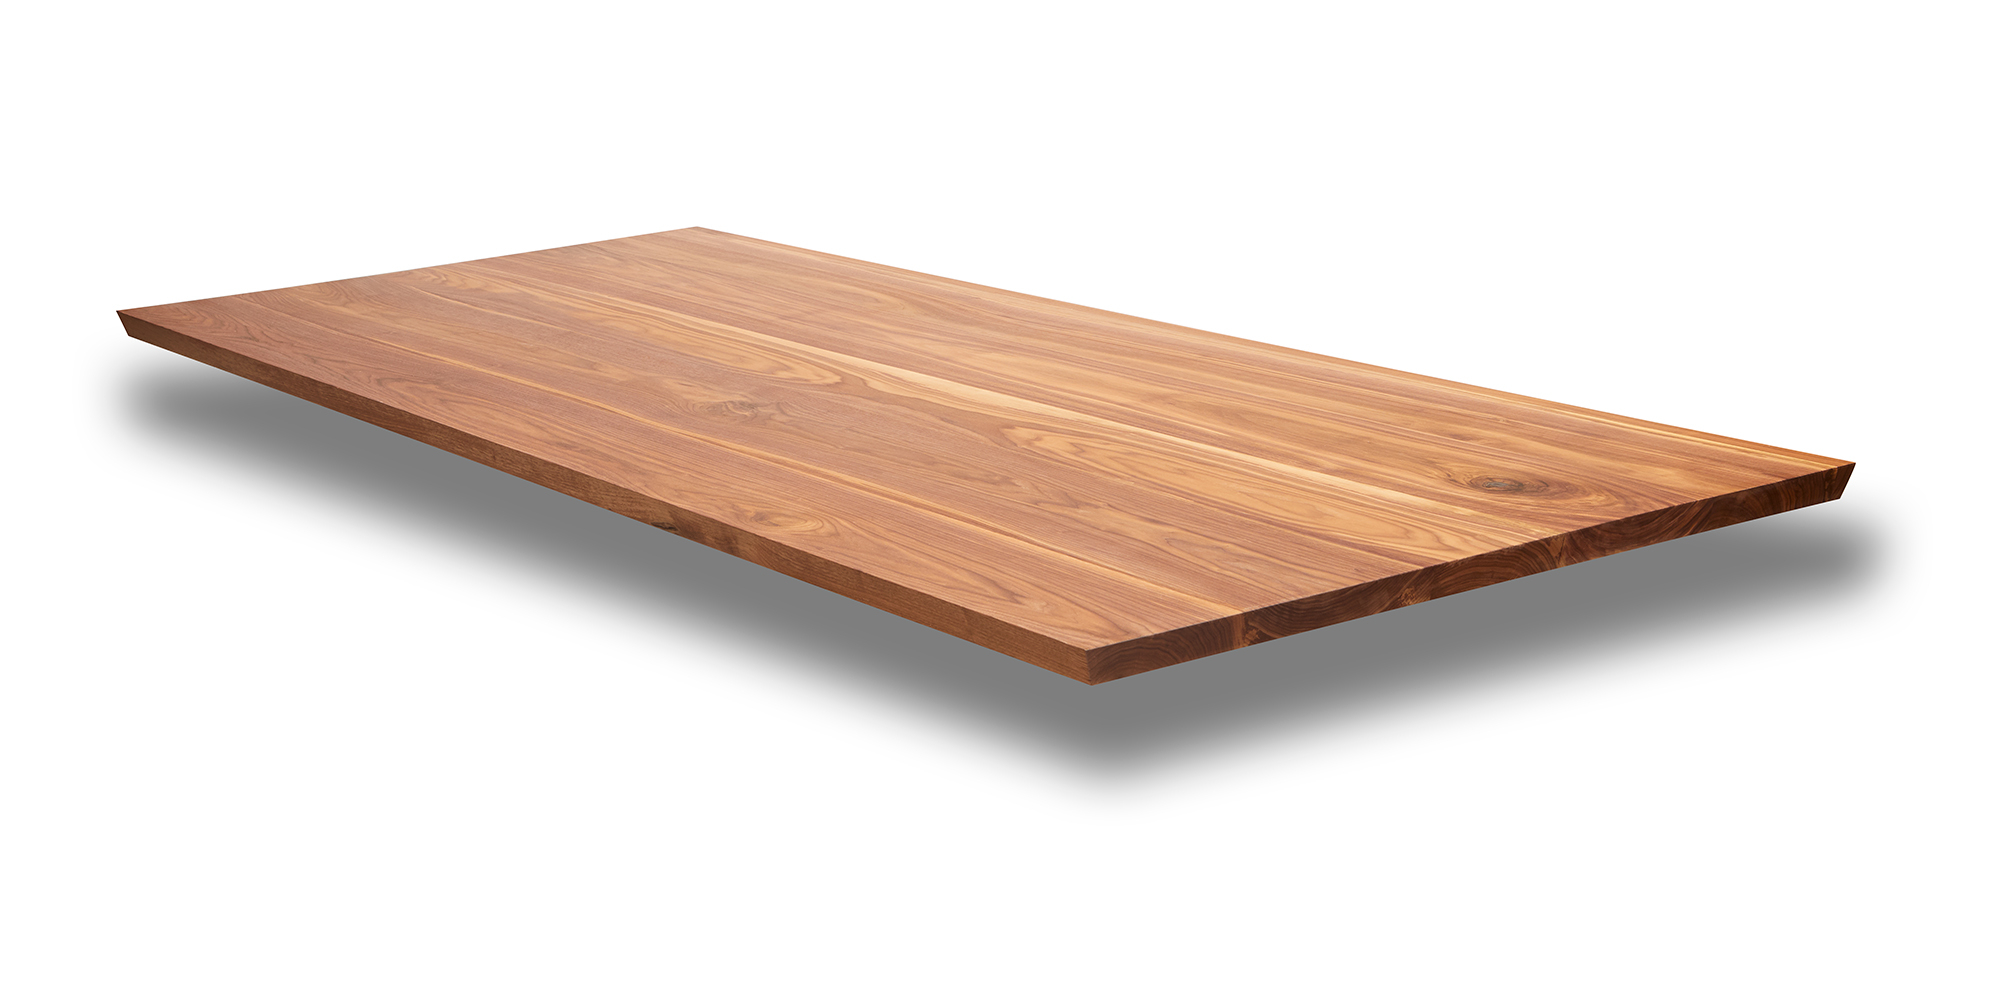 Rectangular Wood Worktops and table tops cut to size, made to measure